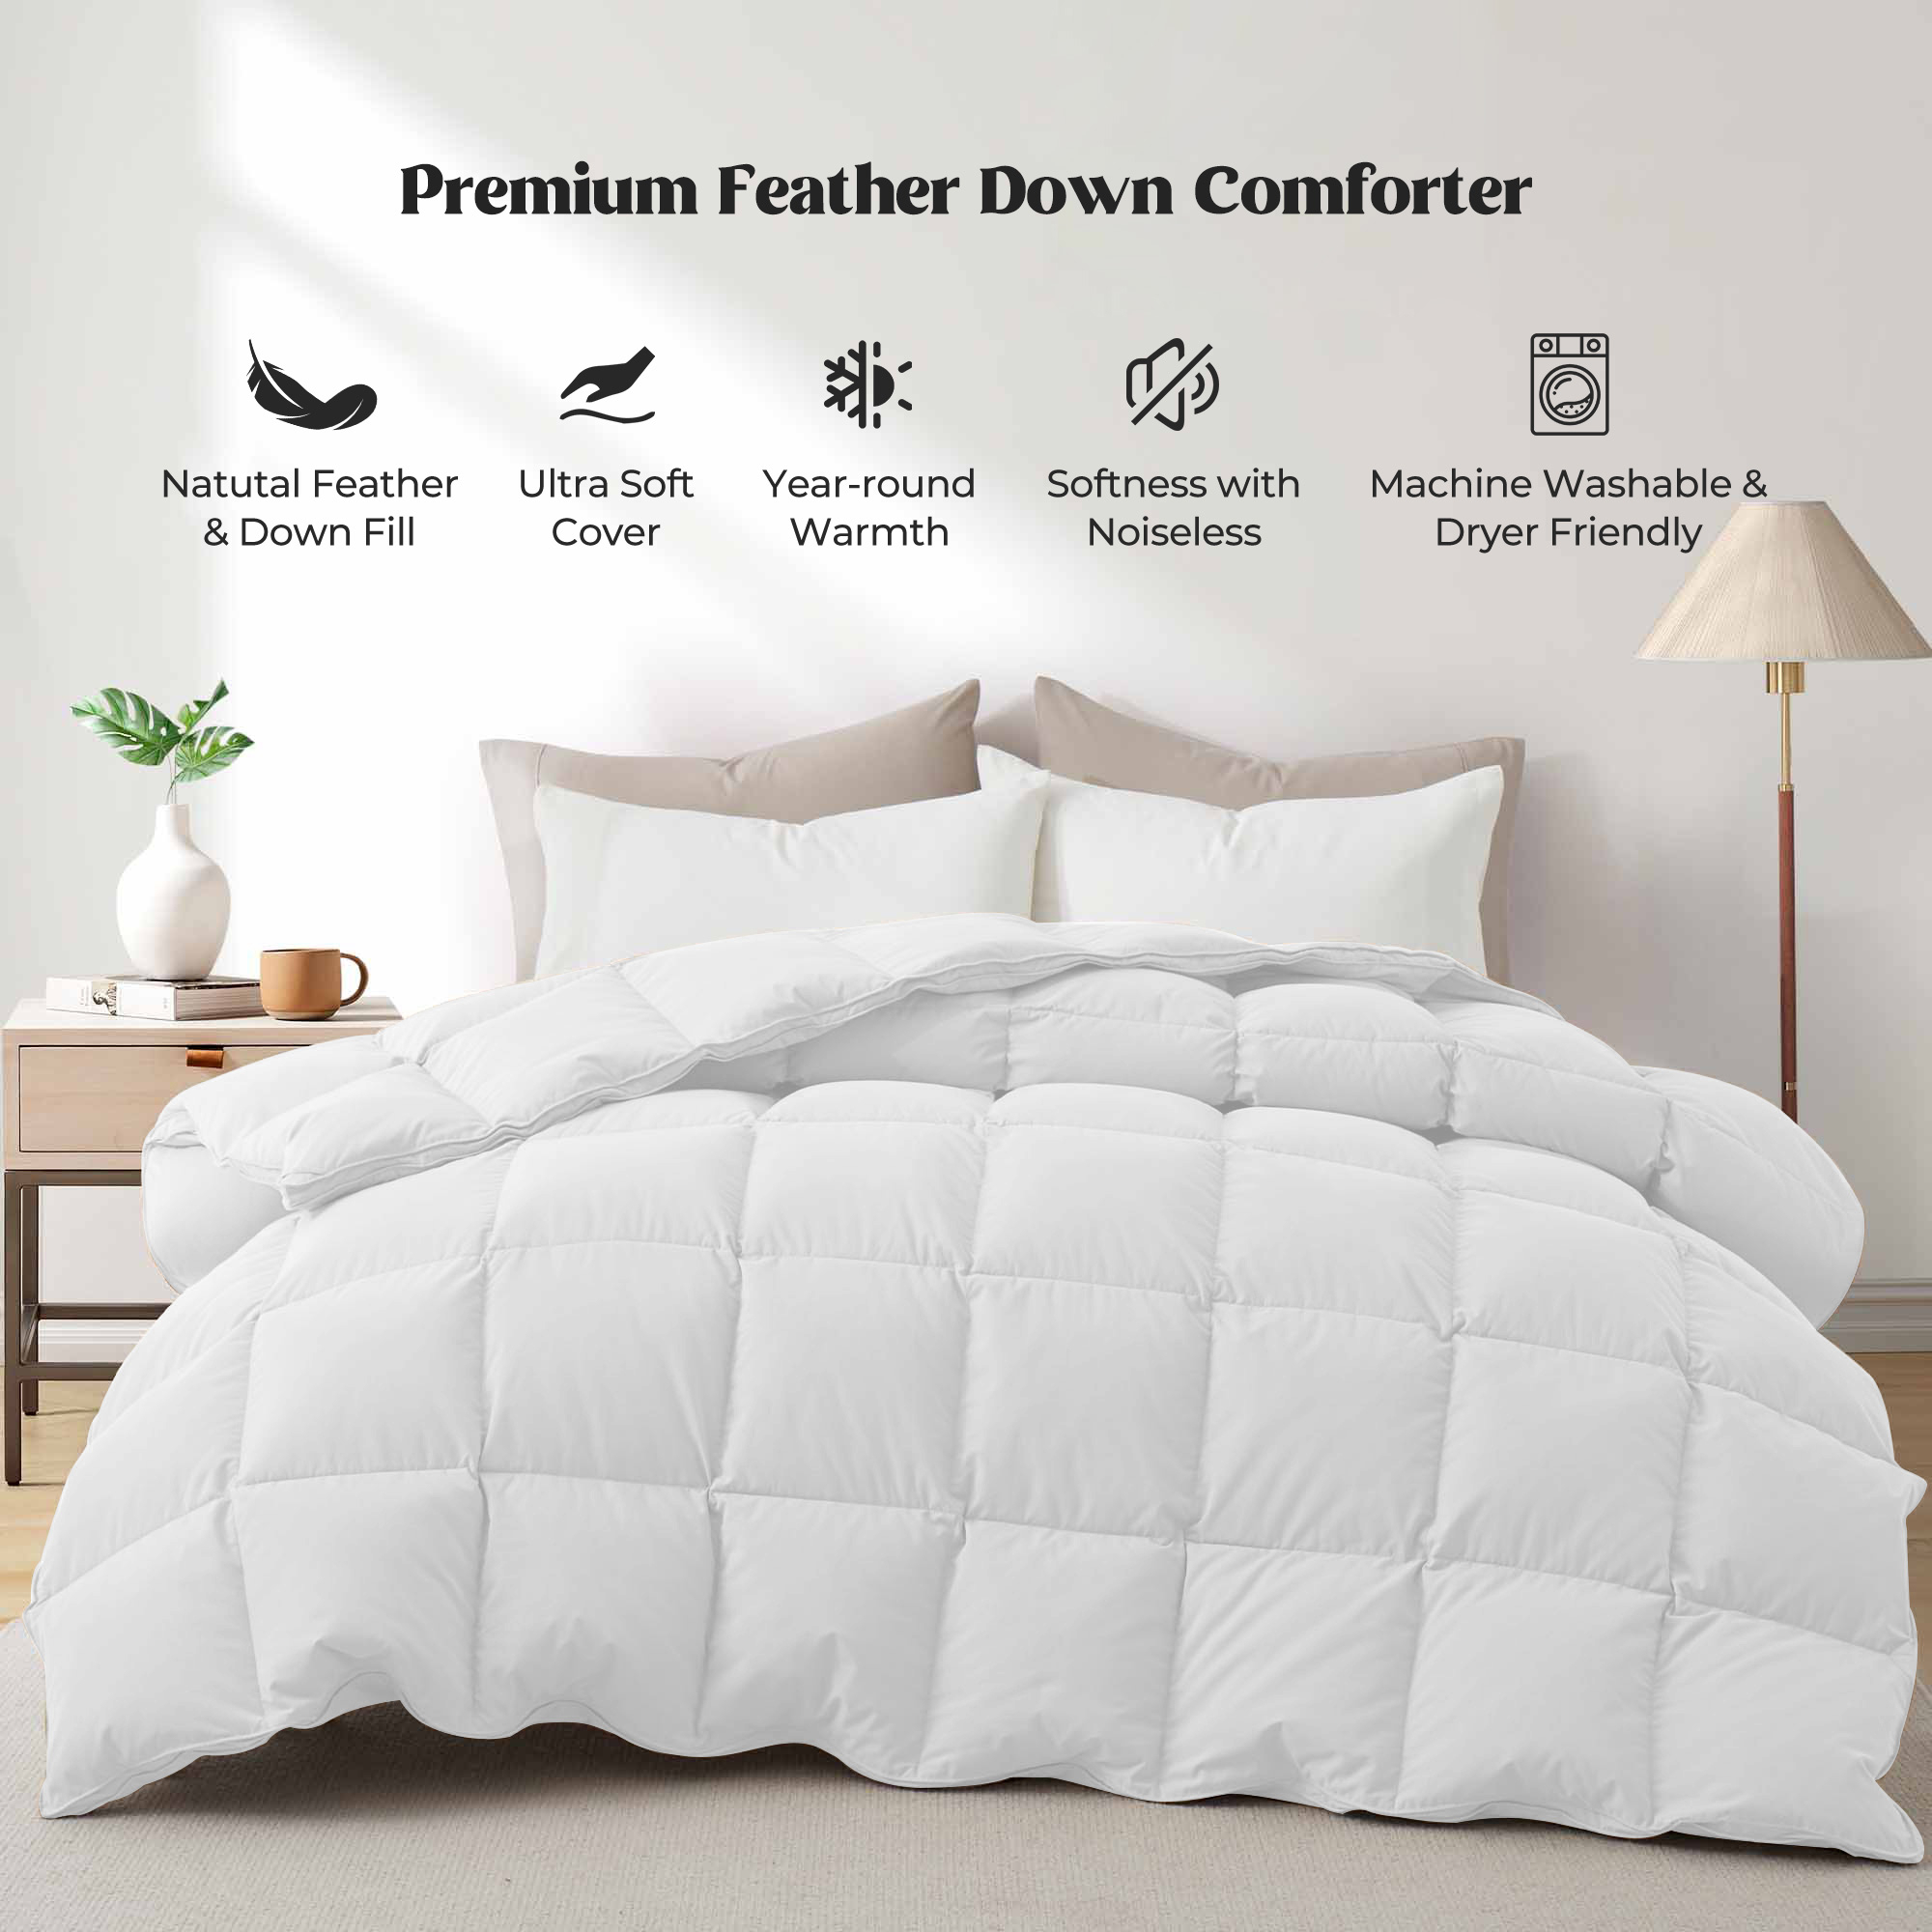 Medium Weight Goose Feather And Down Comforter - White, Twin